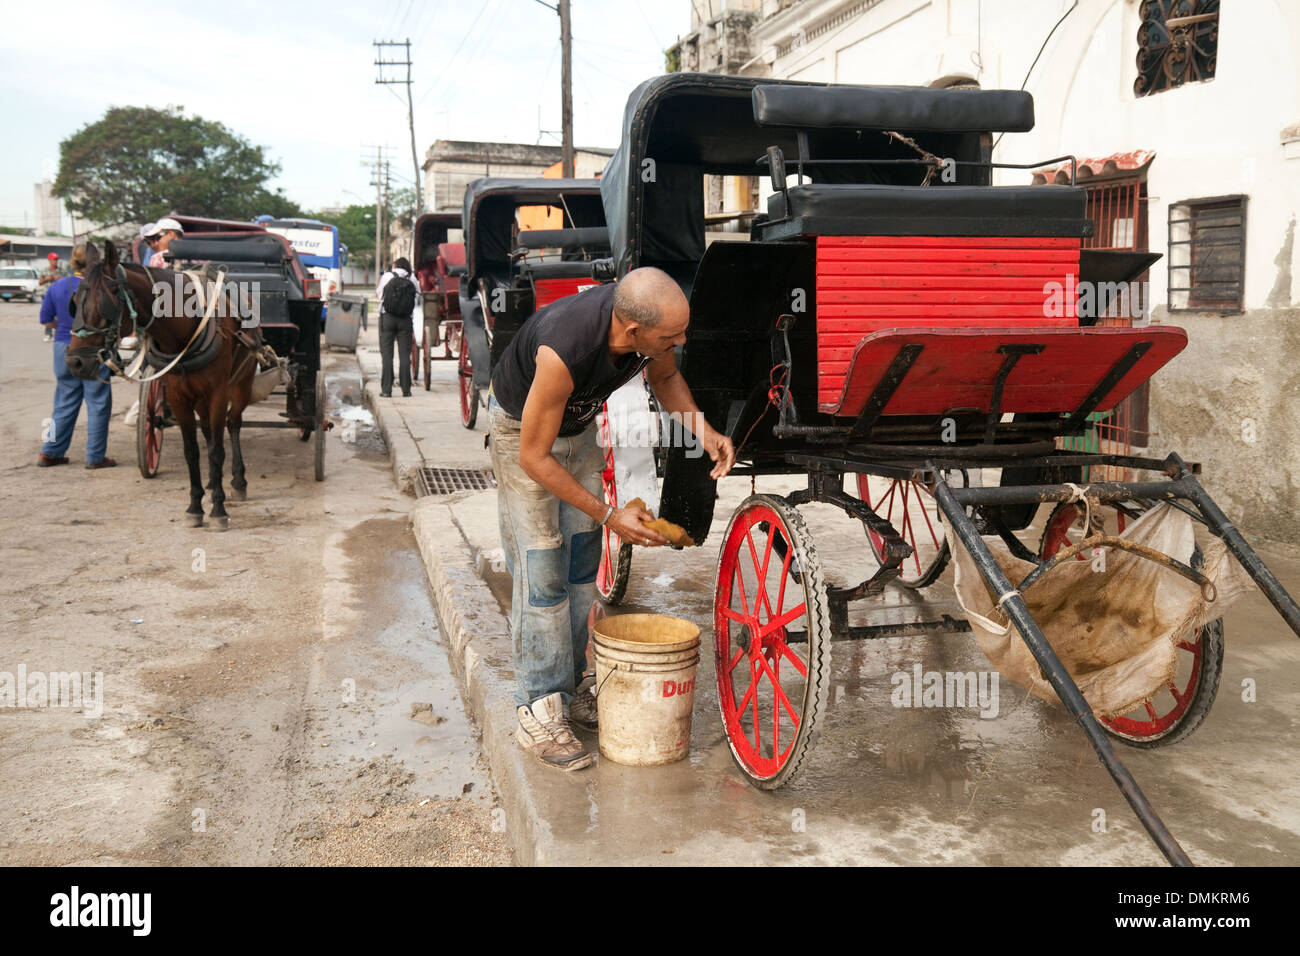 Horse and carriage driver washing down his carriage before work, Havana, Cuba Caribbean, Latin America Stock Photo